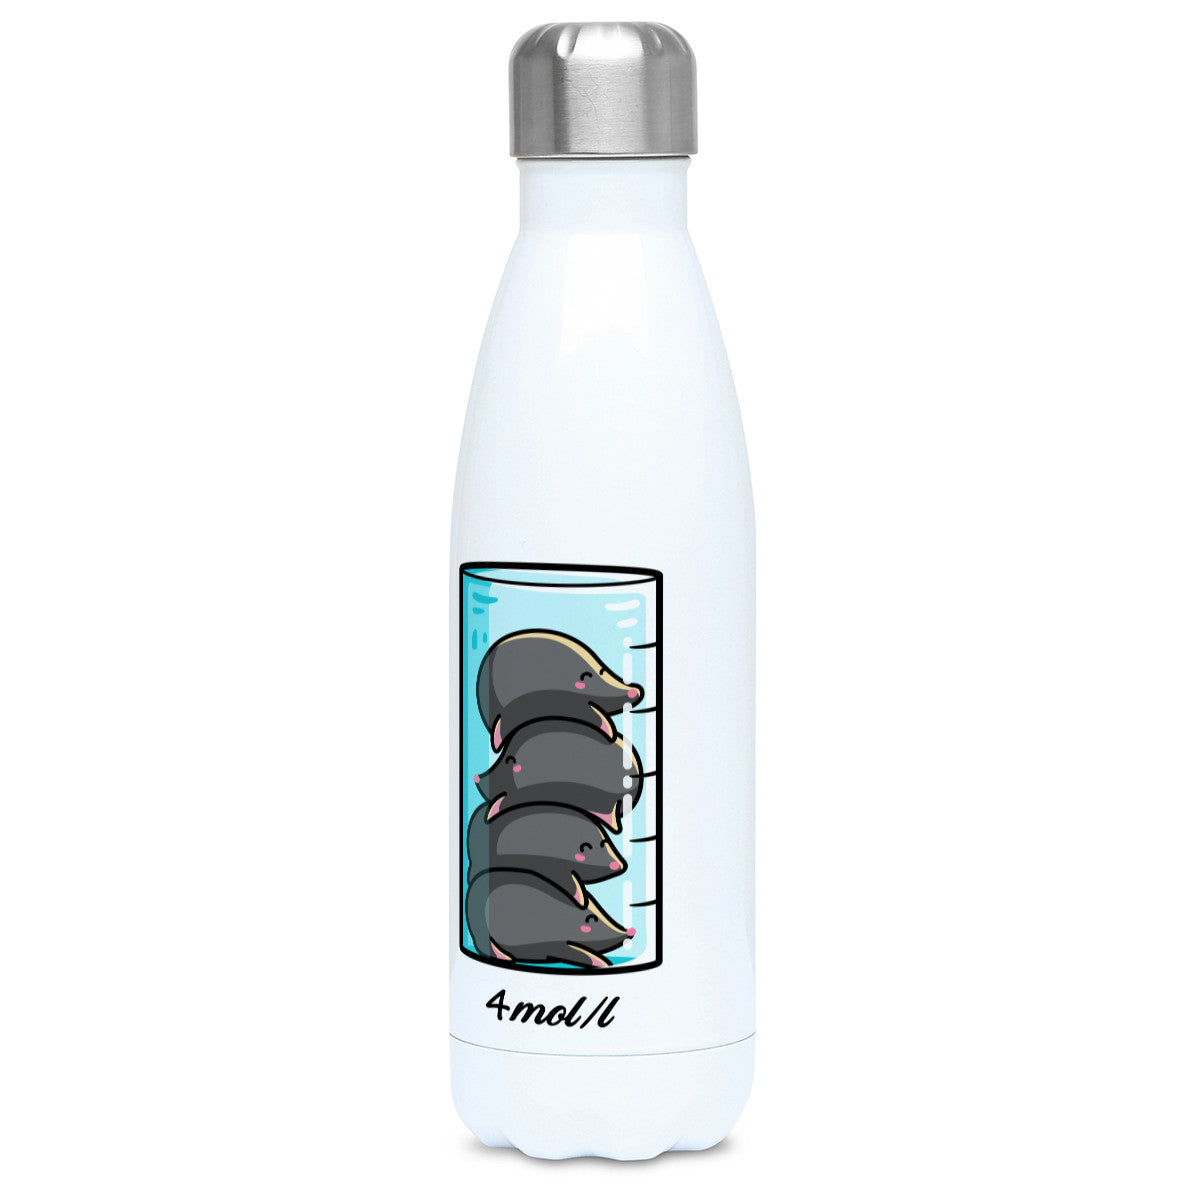 A chemistry beaker filled with 4 cute moles design on a white metal insulated drinks bottle, lid on